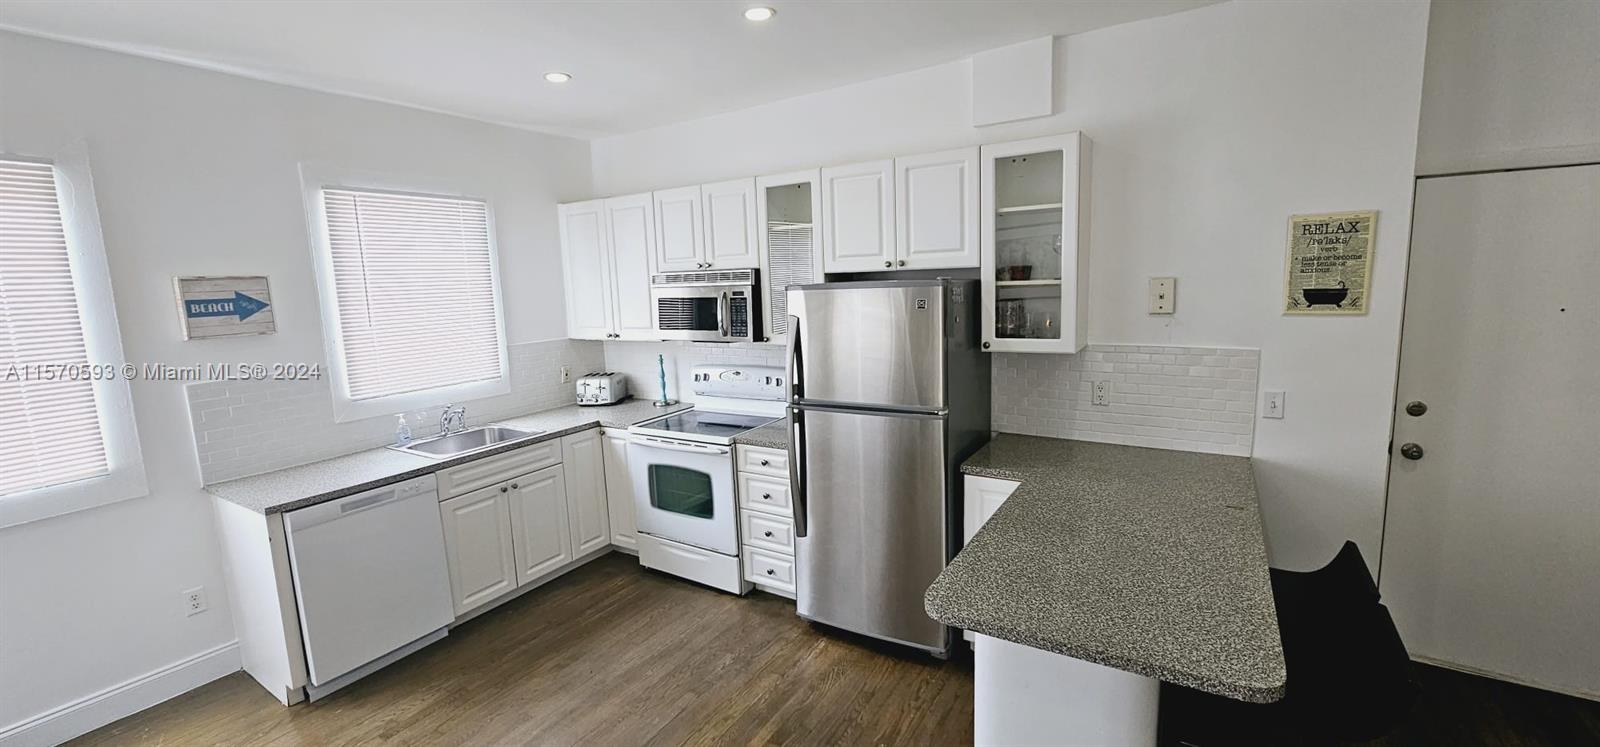 a kitchen with stainless steel appliances granite countertop a refrigerator a stove a sink and white cabinets